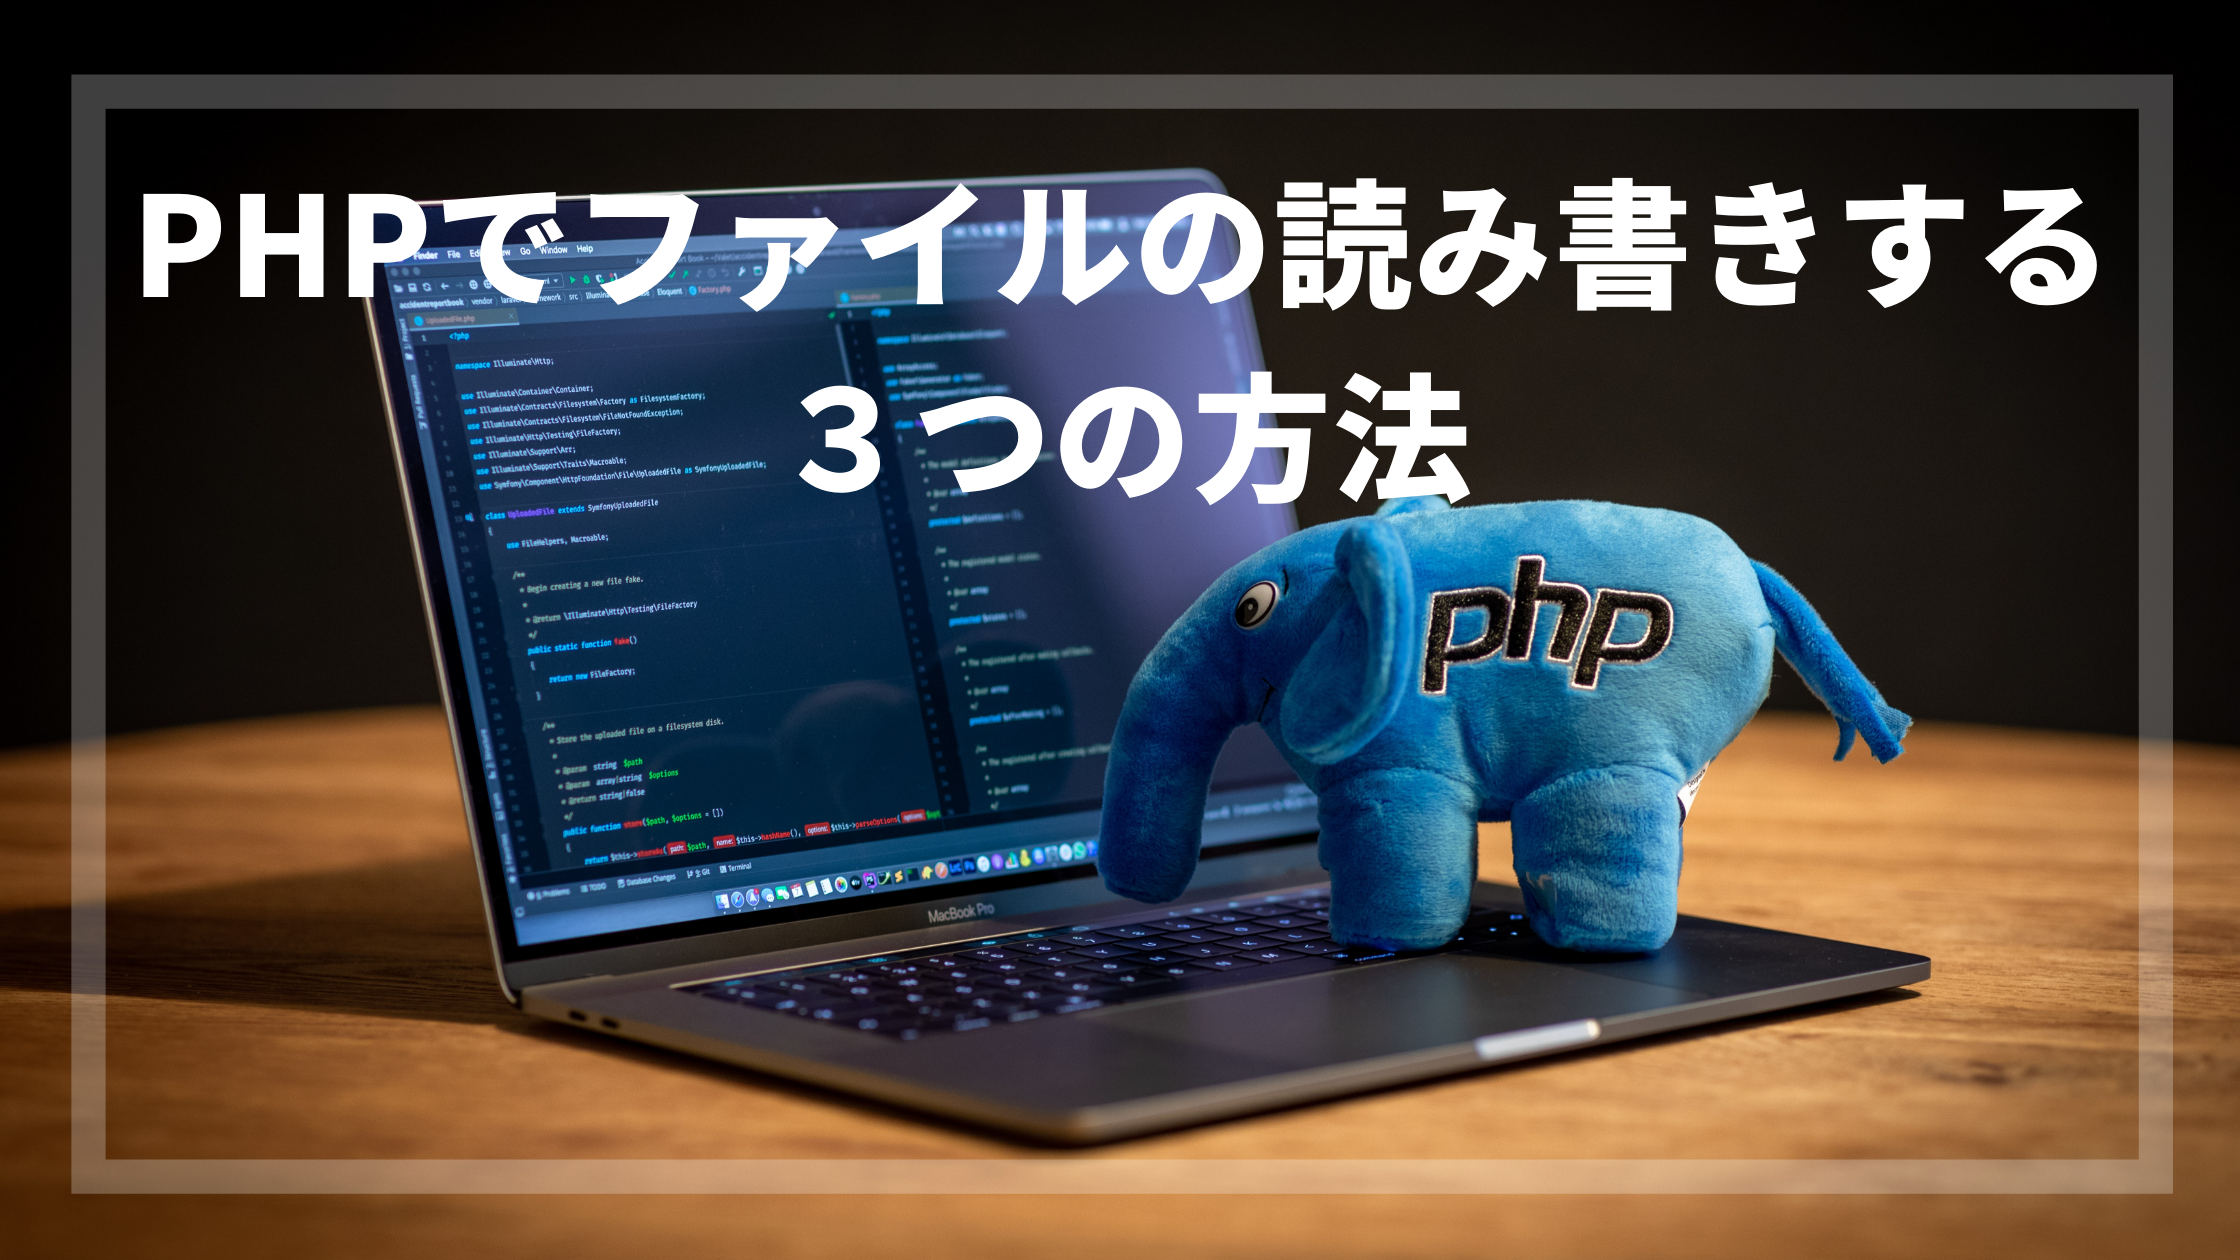 PHPでファイルの読み書きする３つの方法（fopen/file/file_get_contents・file_put_contents）